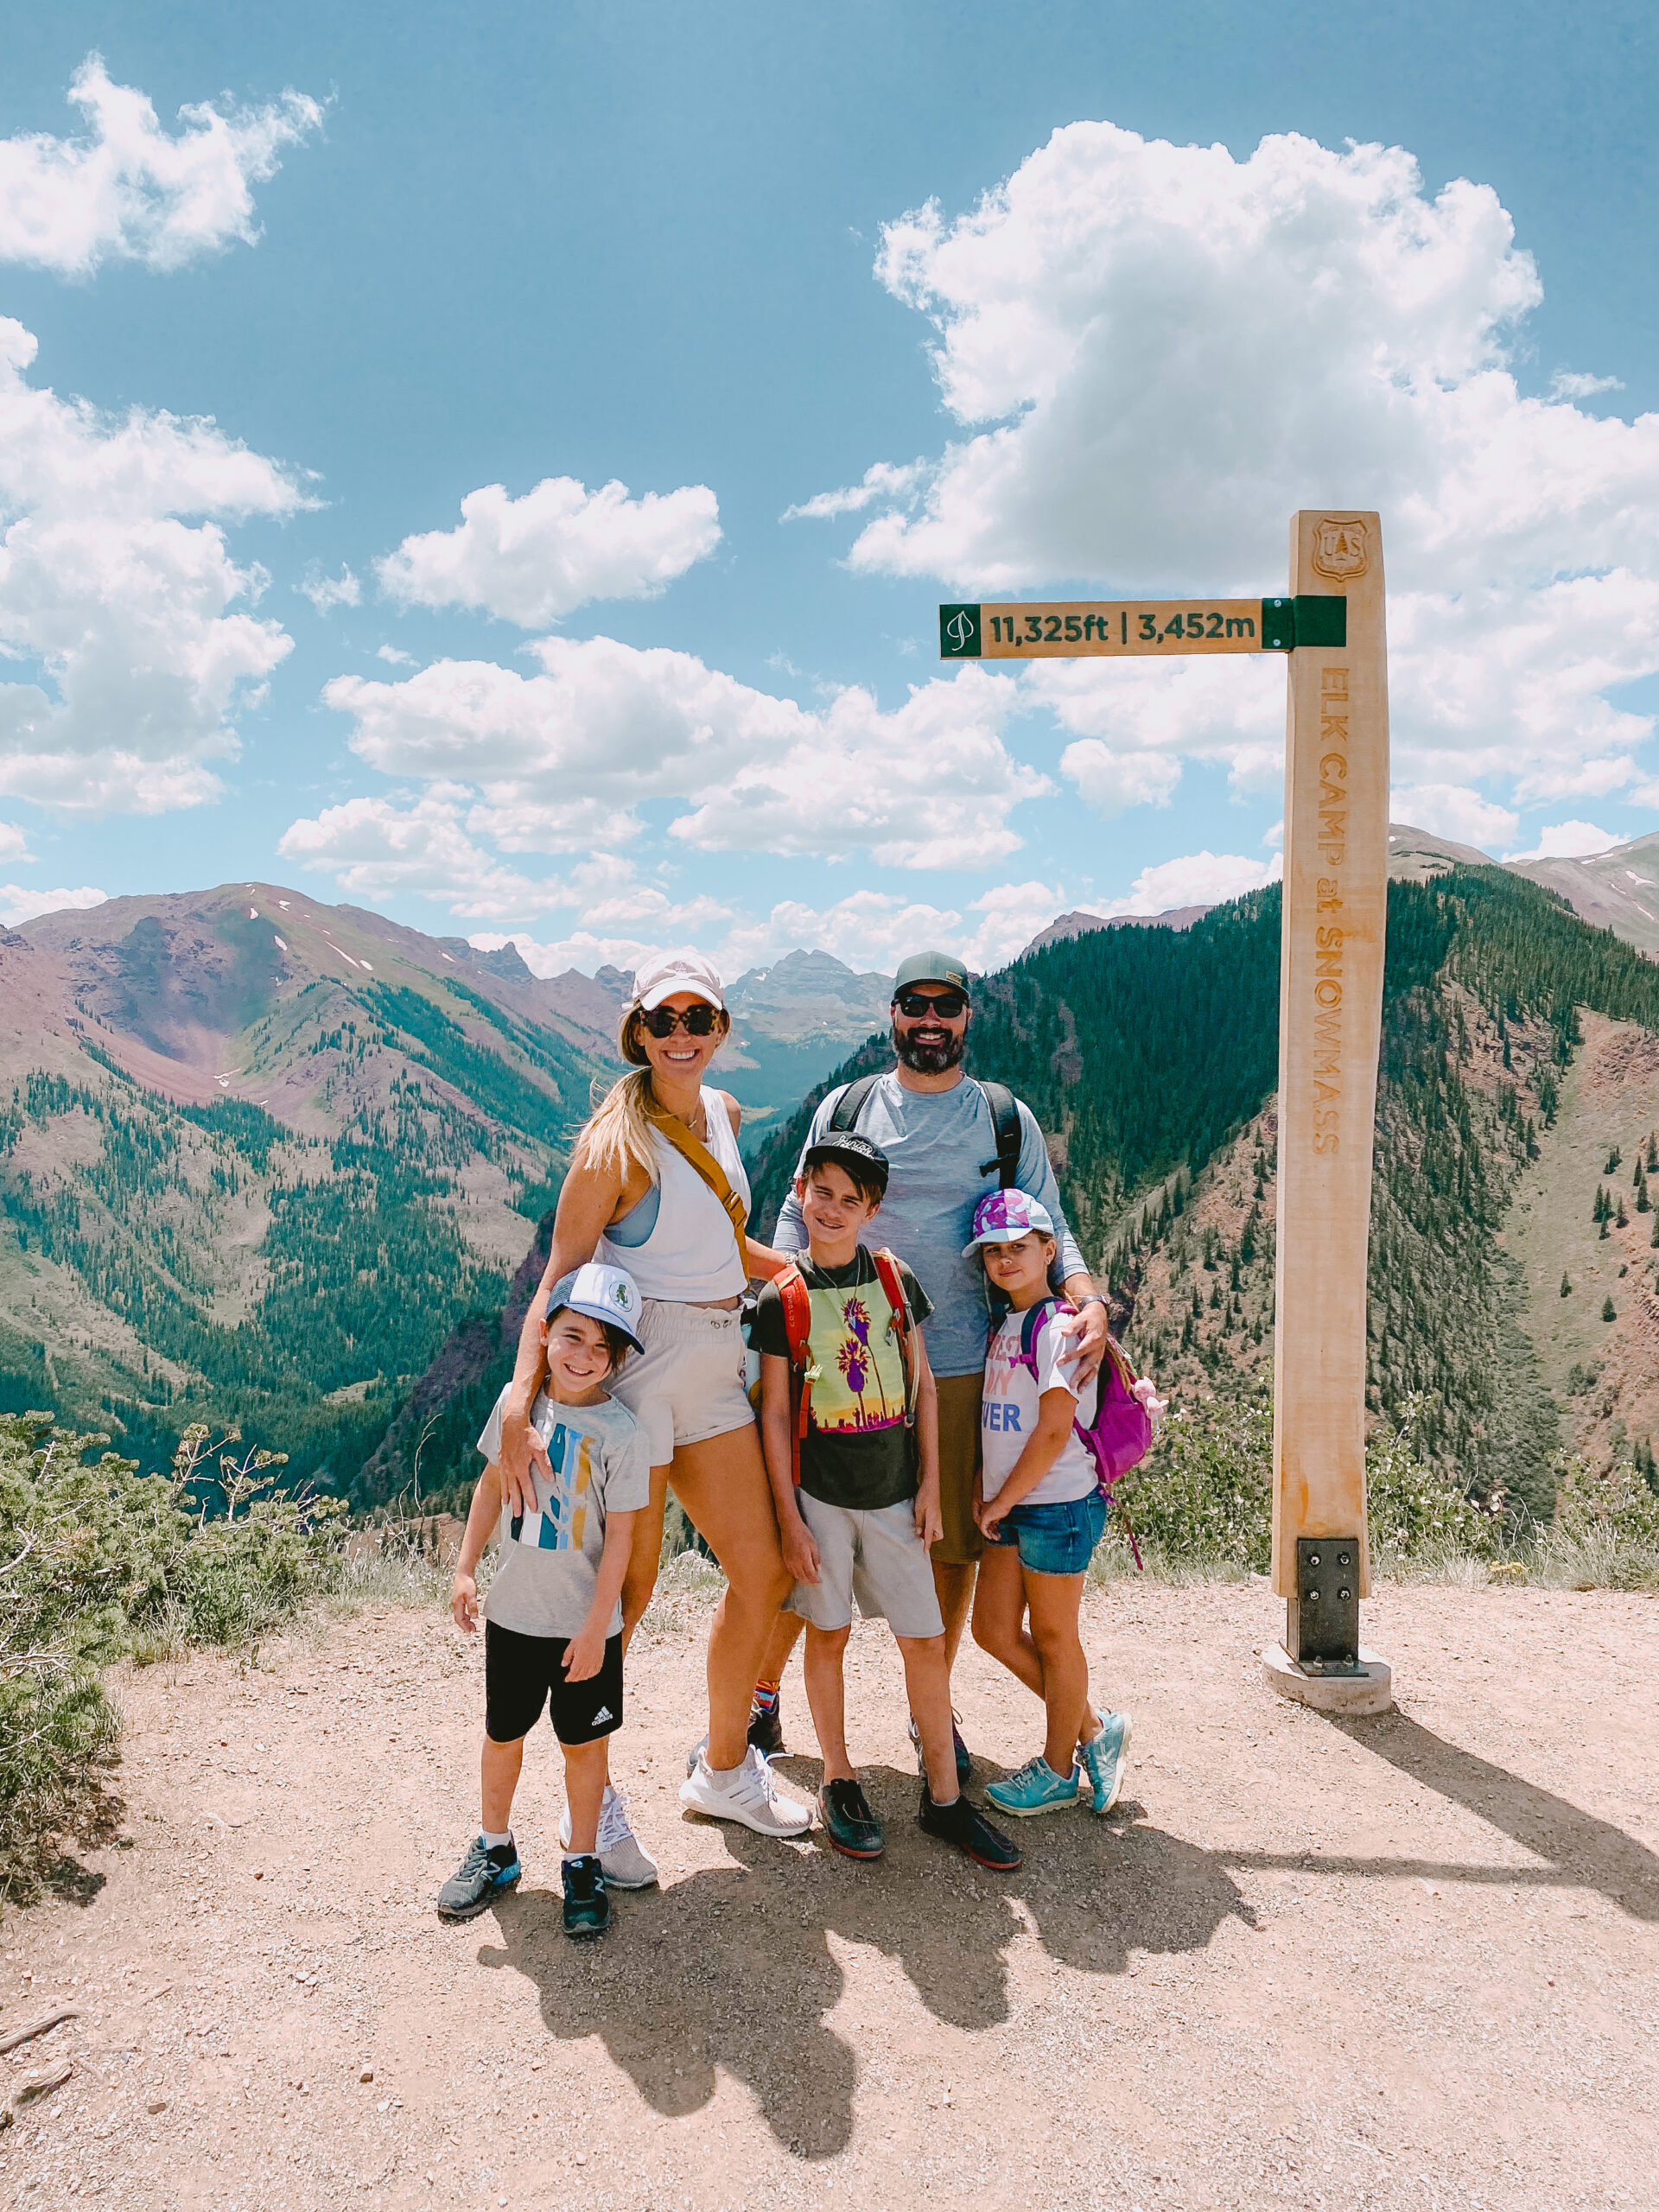 We love Snowmass in the summer! Take the Elk Camp Gondola, then the Elk Camp chairlift all the way up to this spot! Then enjoy a nice easy hike back down to Elk Camp base. #snowmasscolorado #thingstodoinsnowmass #visitcolorado #travelwithkids